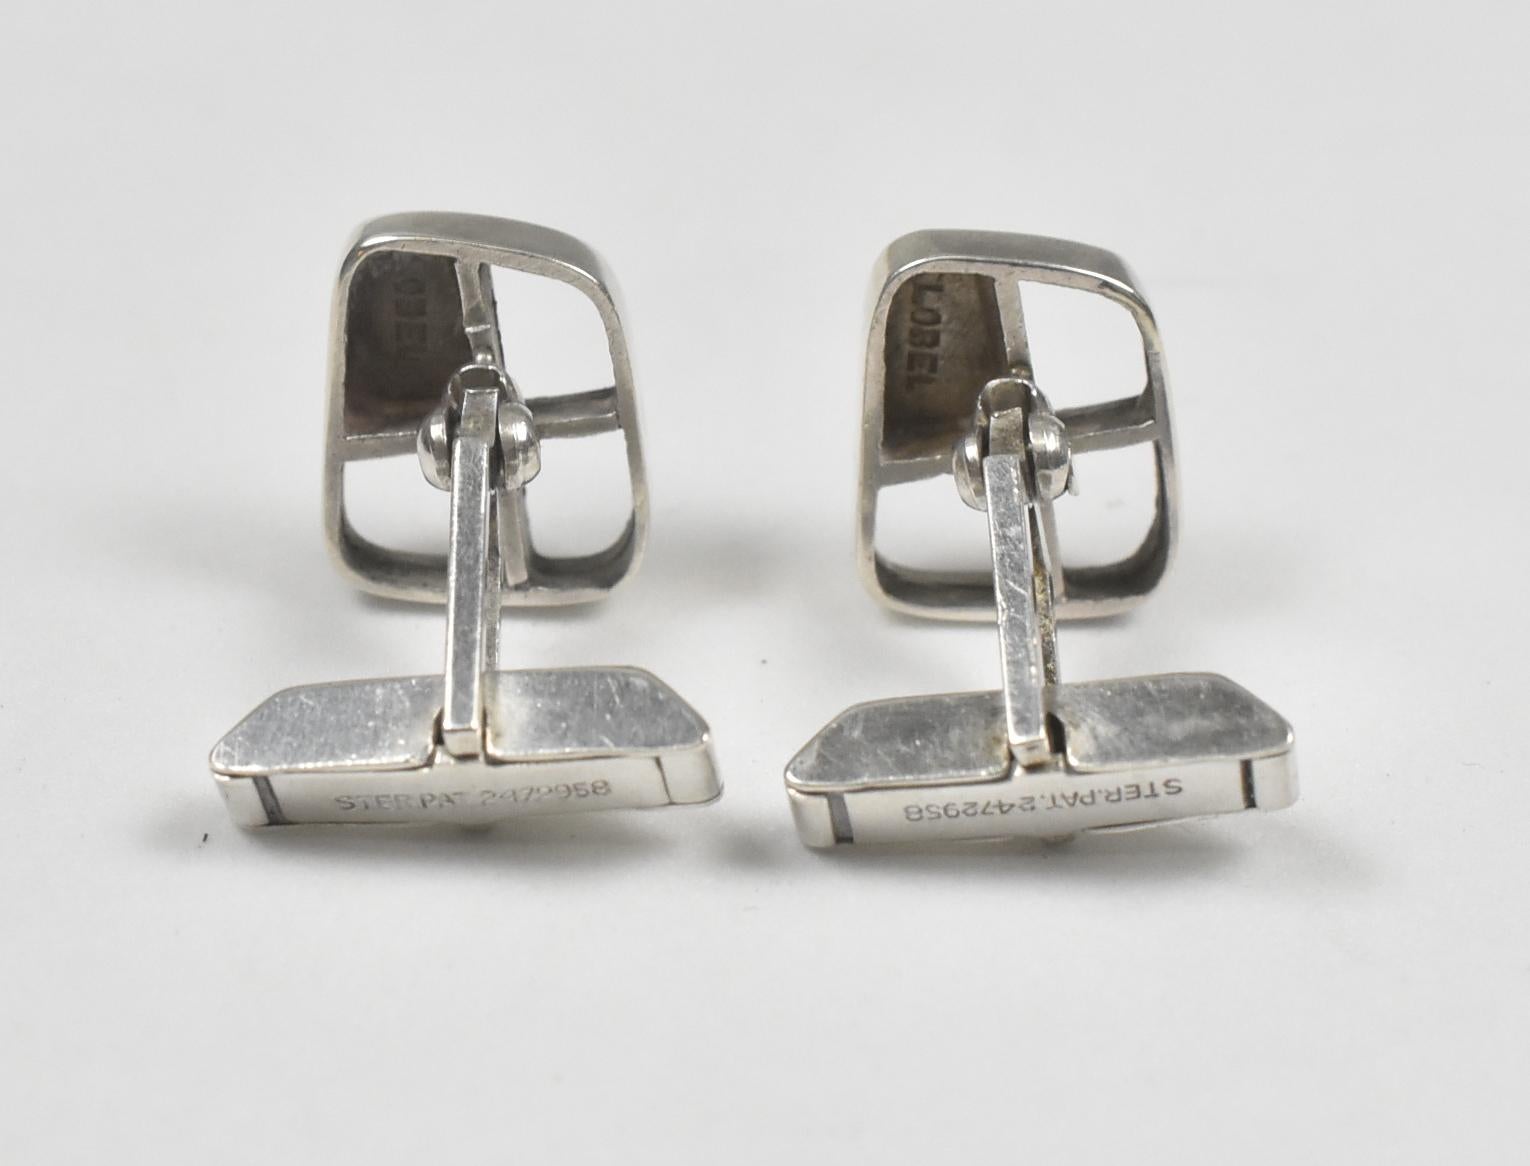 Modernist Sterling Silver Cufflinks by Paul Lobel In Good Condition For Sale In Toledo, OH